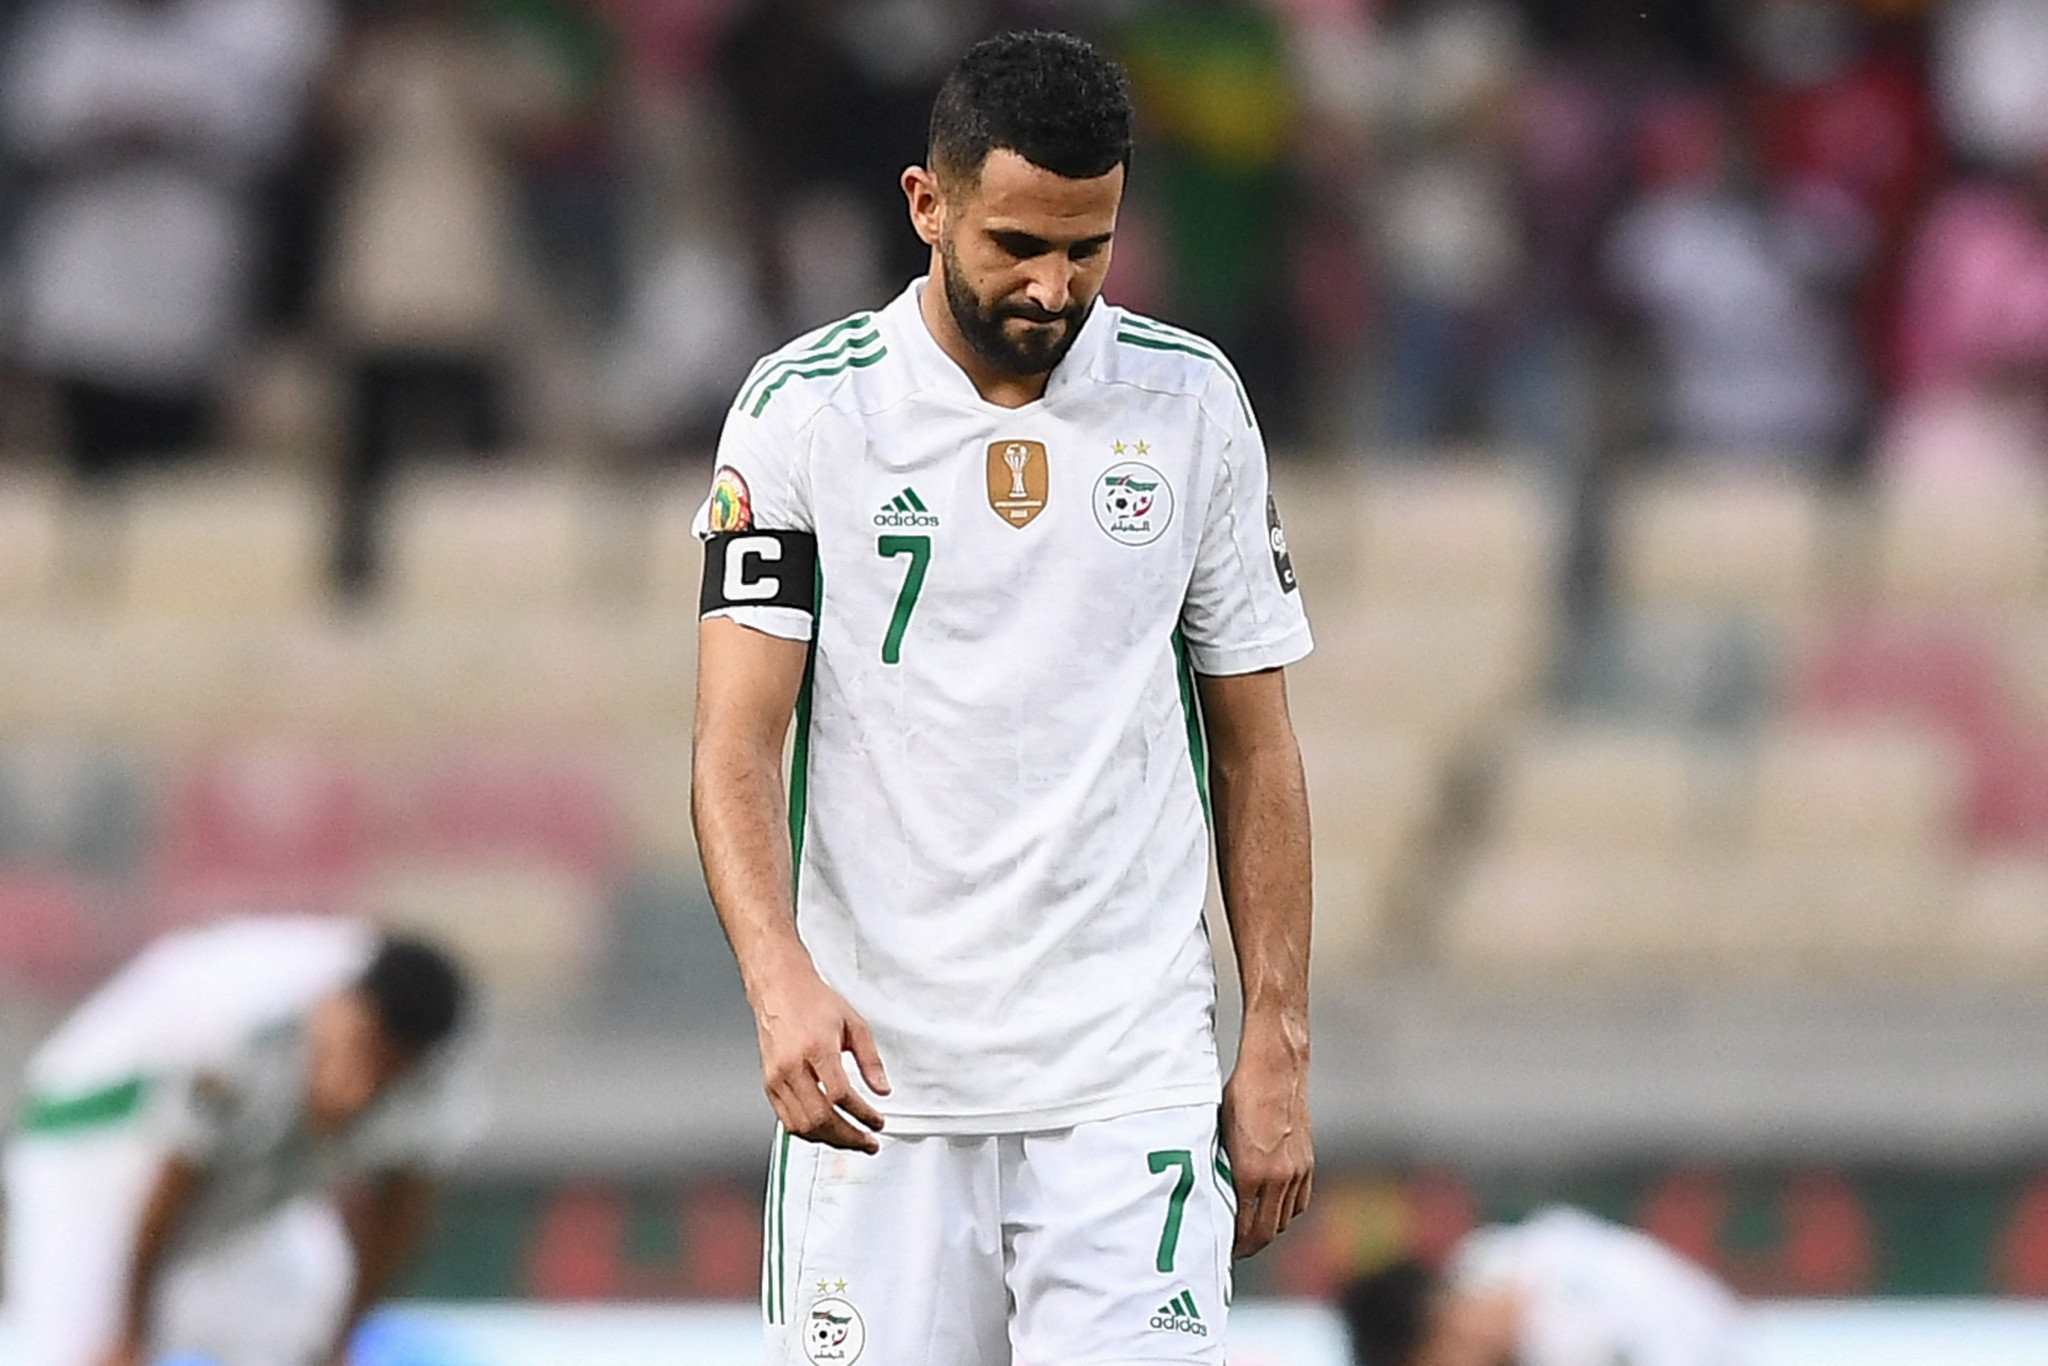 Algeria has fallen the most in the world rankings after their group stage exit ©Getty Images